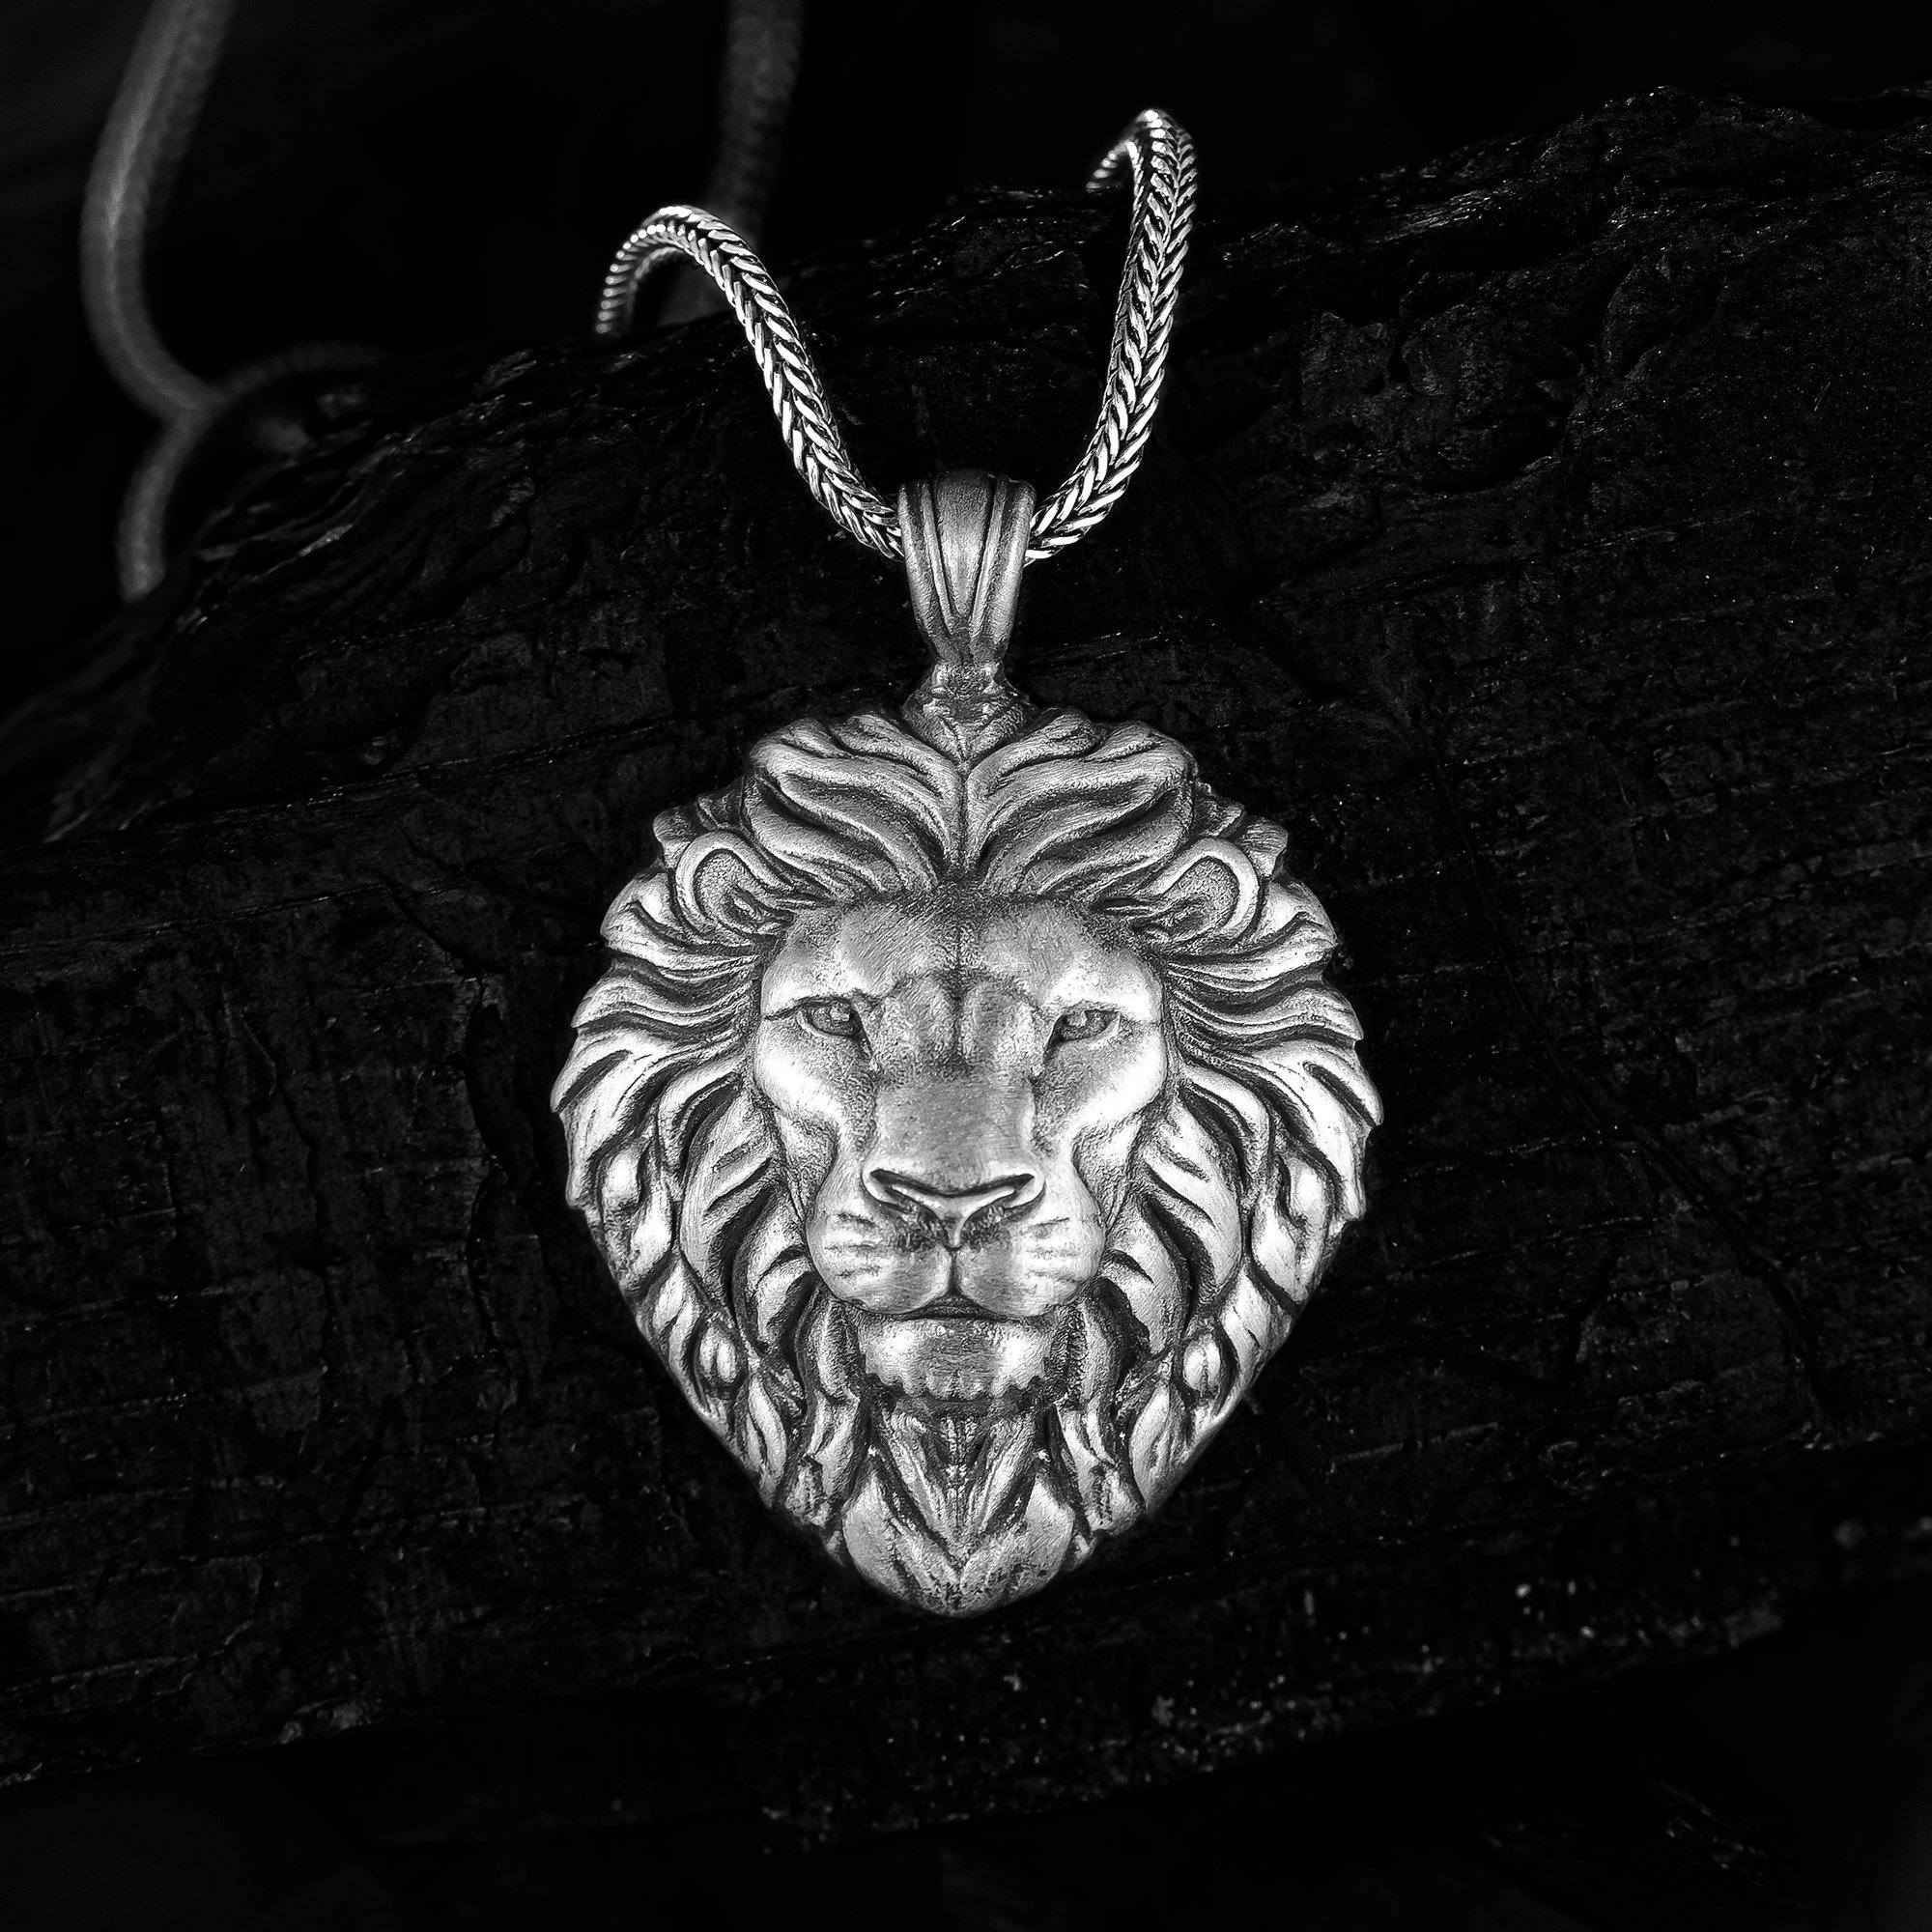 Silver Lion Mens Necklace with Chain, 925 Silver Lion Head Men Pendant - OXO SILVER